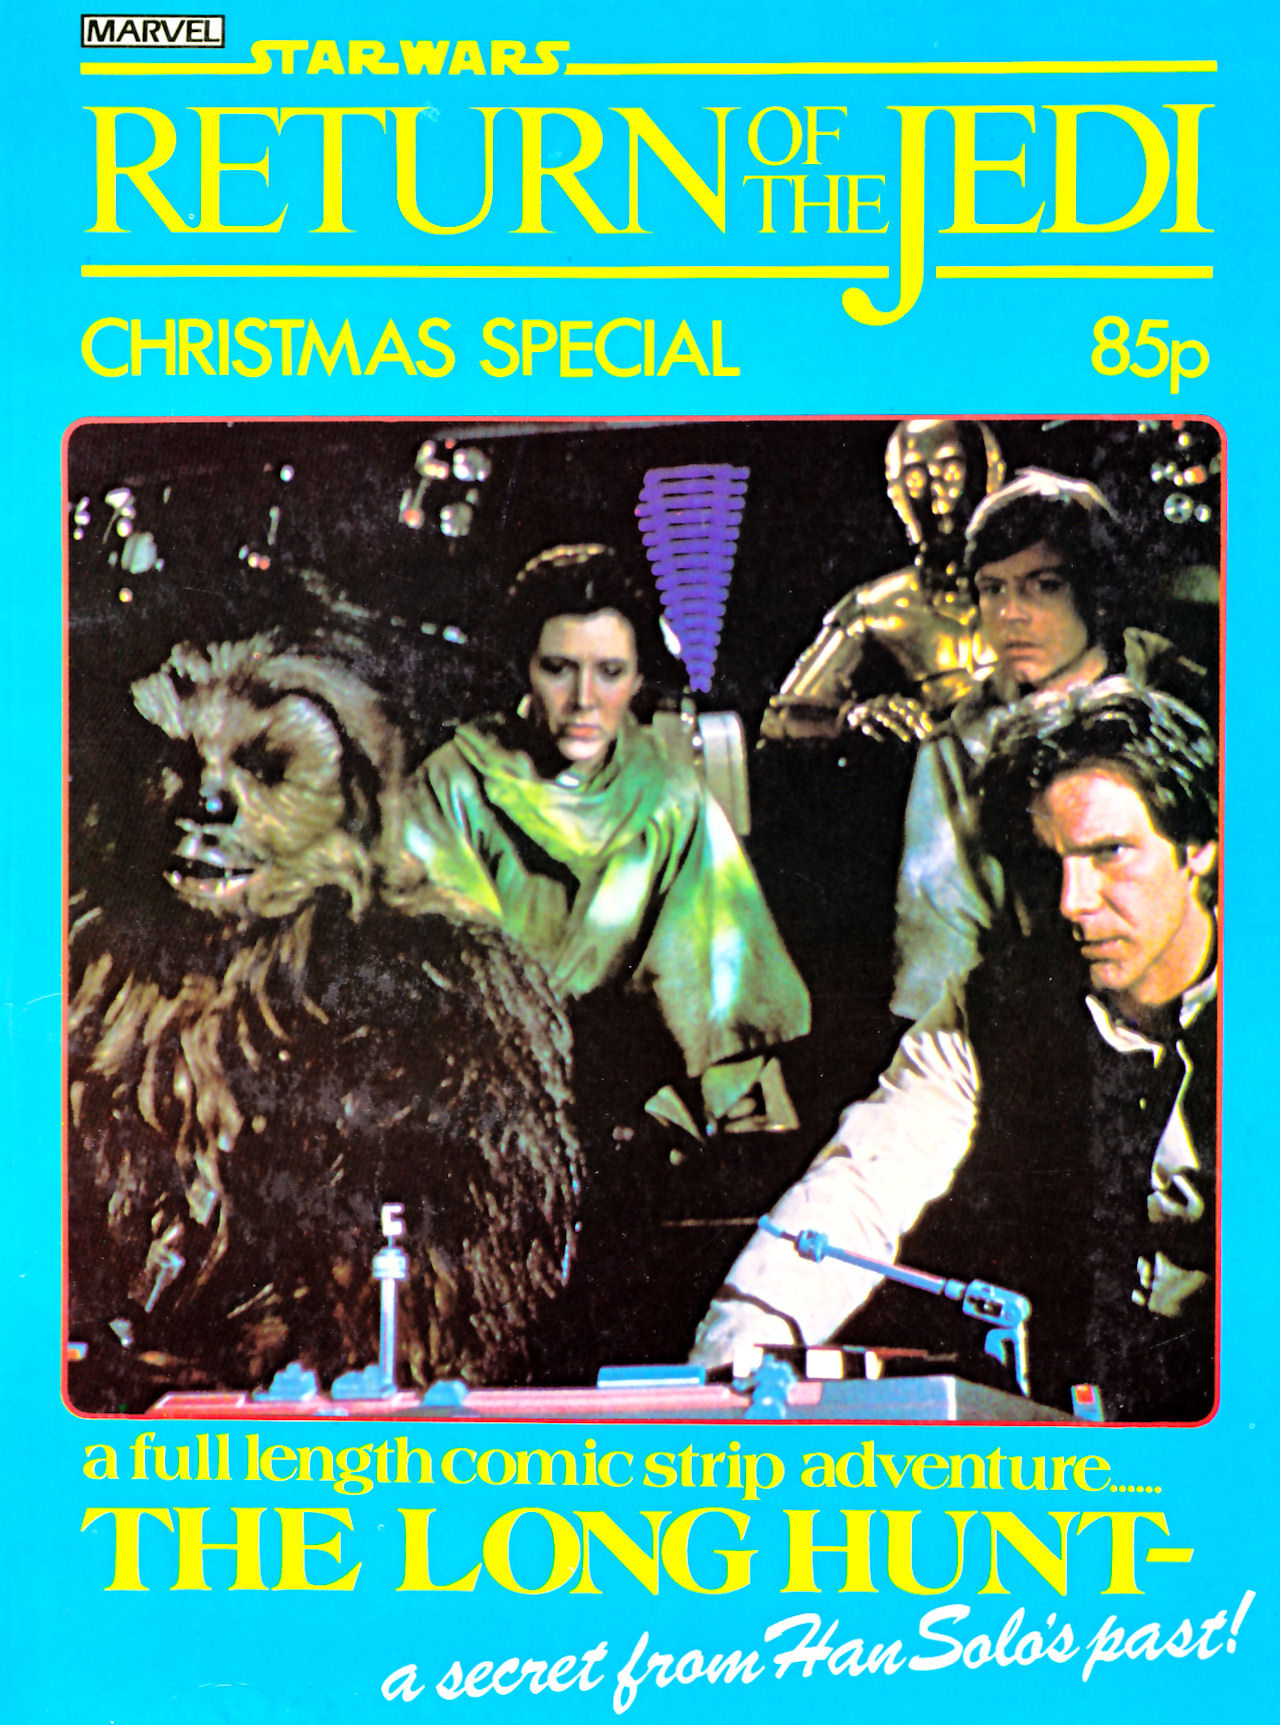 Return of the Jedi Christmas Special